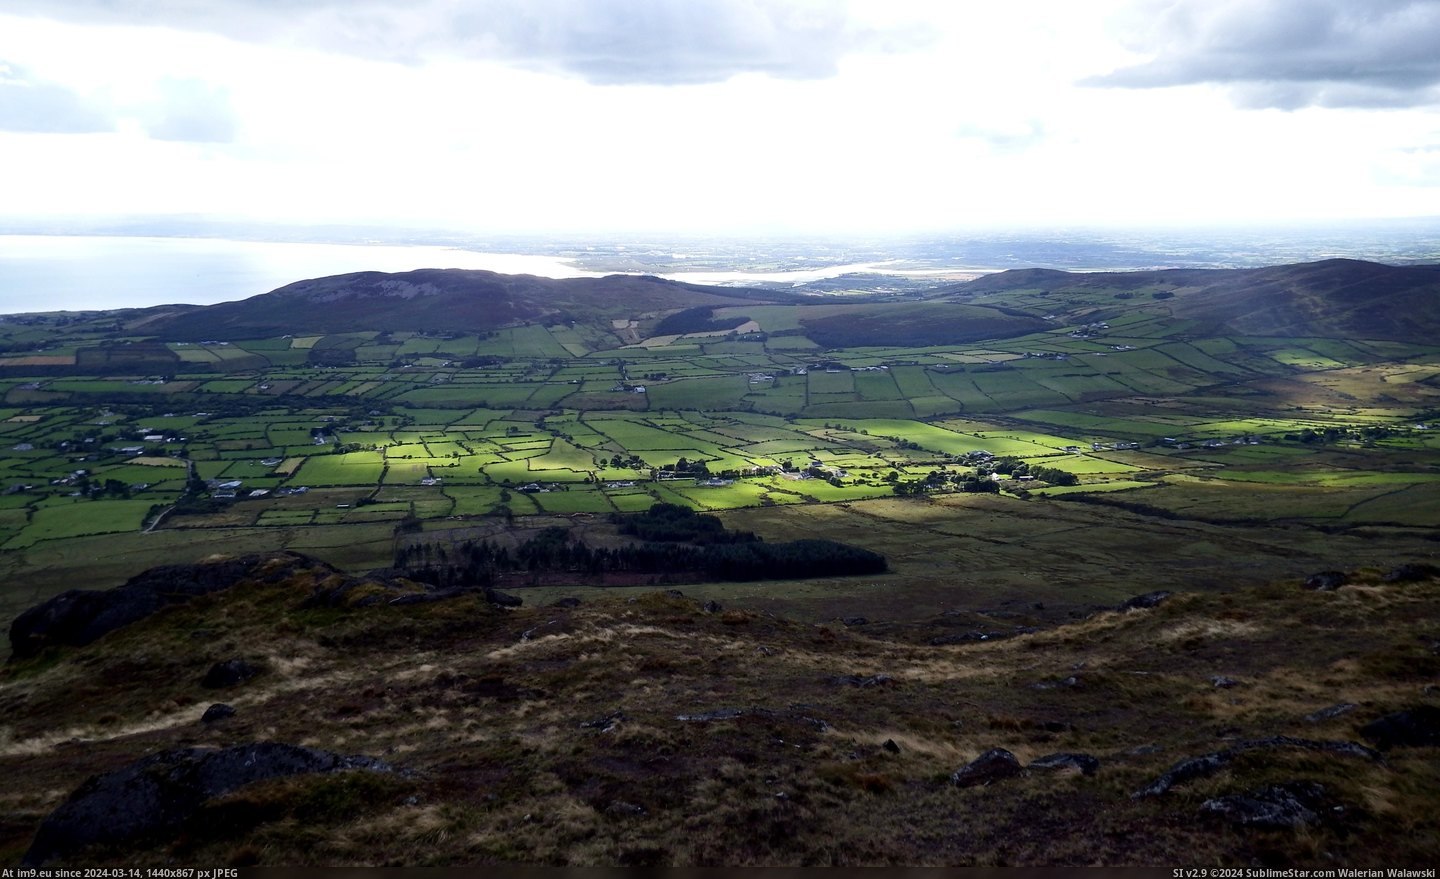 #Top #Ireland #Mountain [Earthporn] View from the mountain top - Ireland - [4604x2784] Pic. (Изображение из альбом My r/EARTHPORN favs))